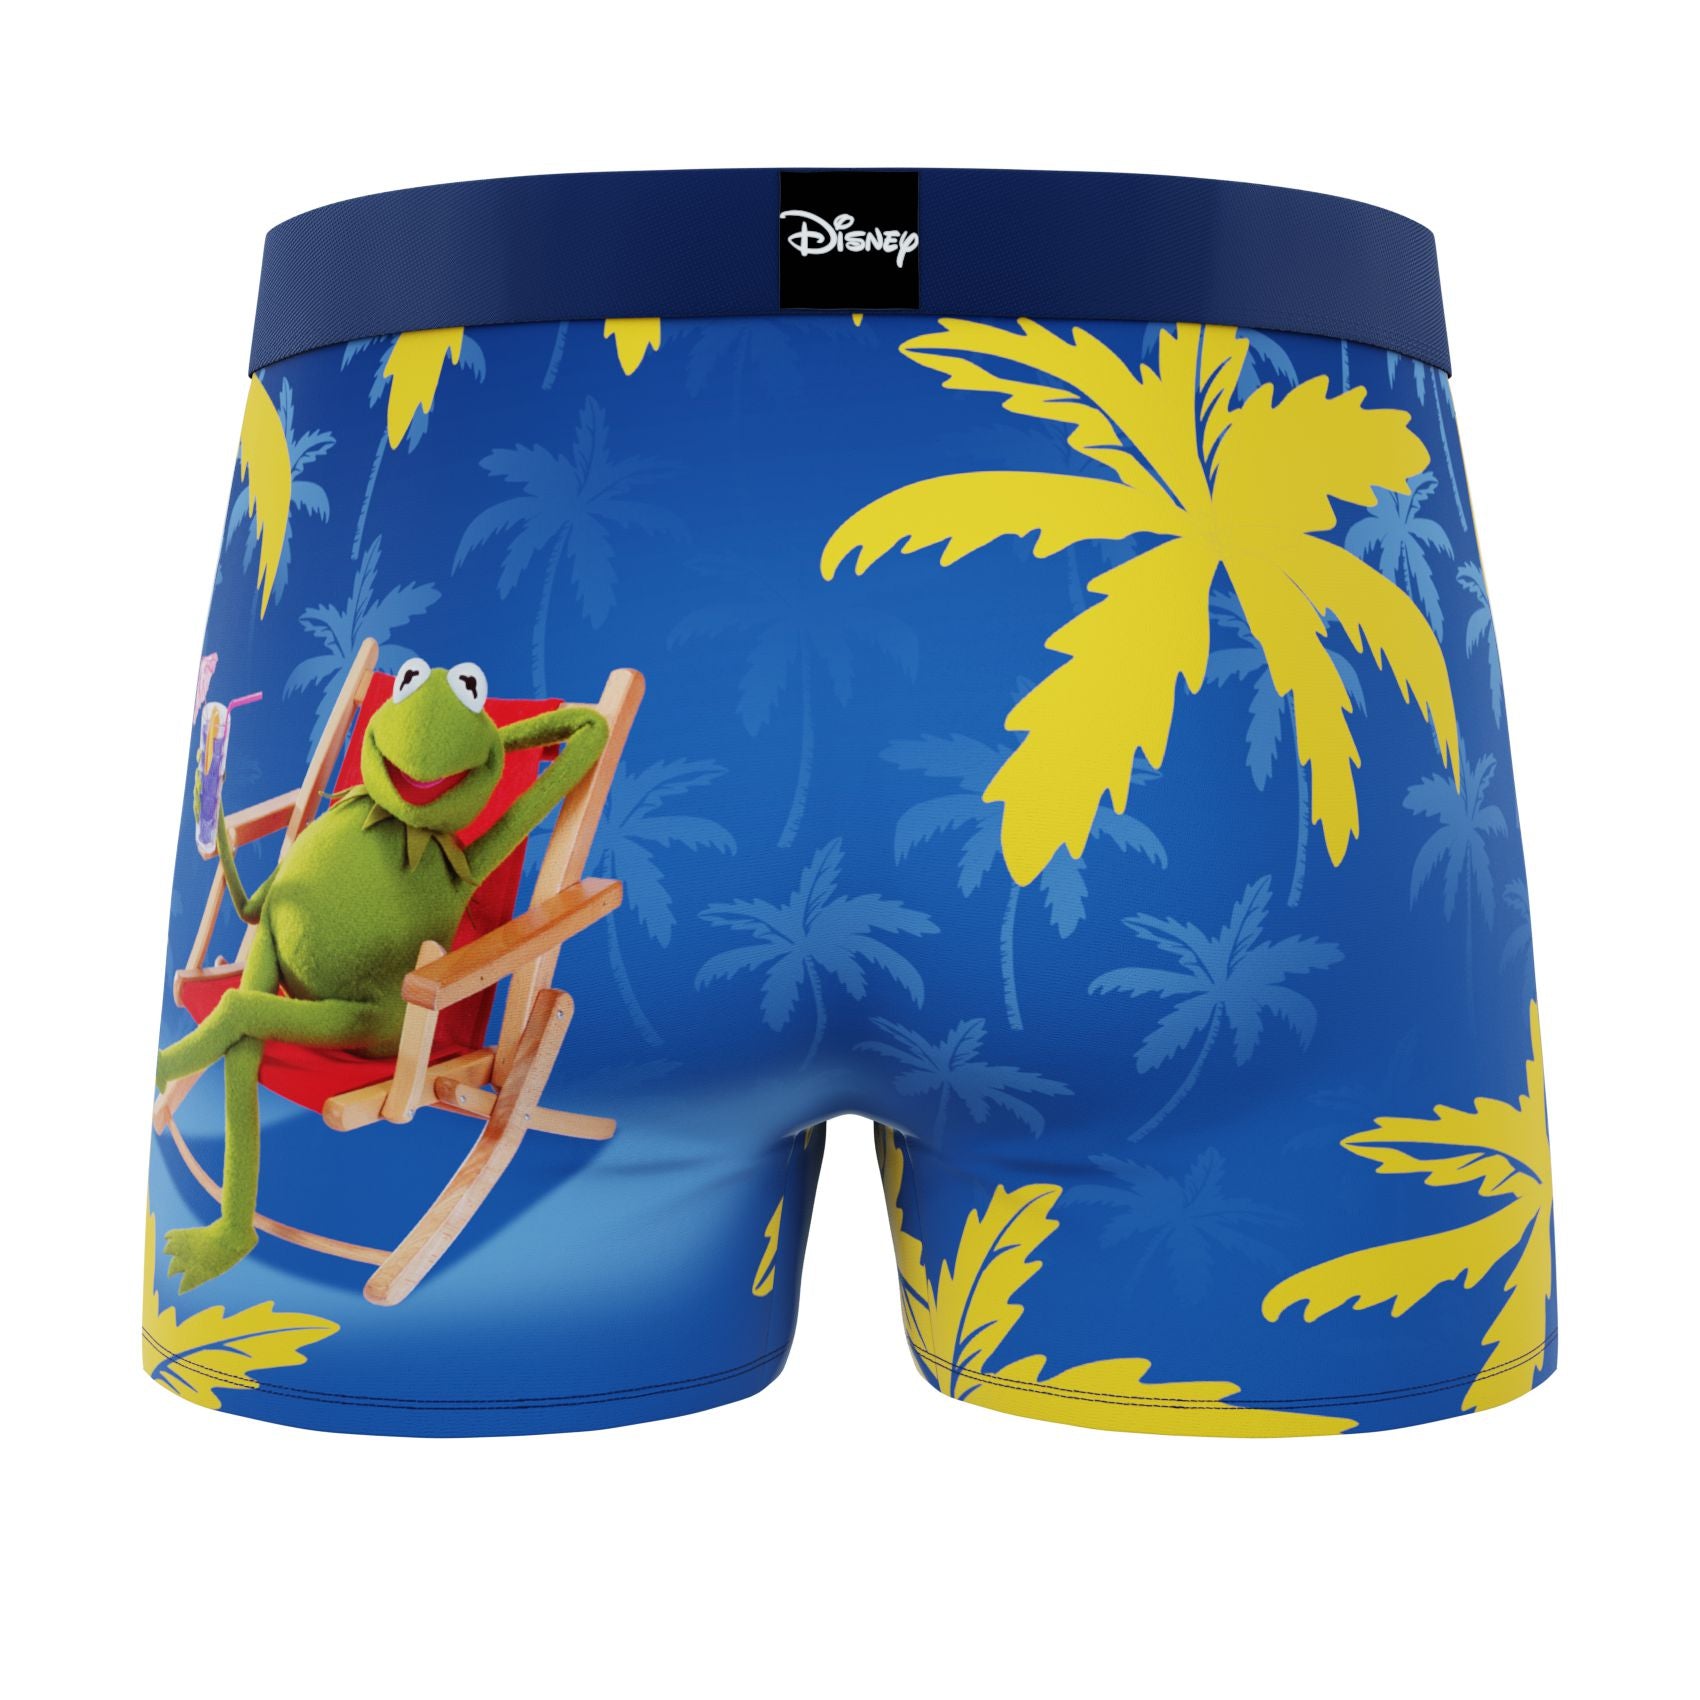 CRAZYBOXER Toy Story All Characters Men's Boxer Briefs